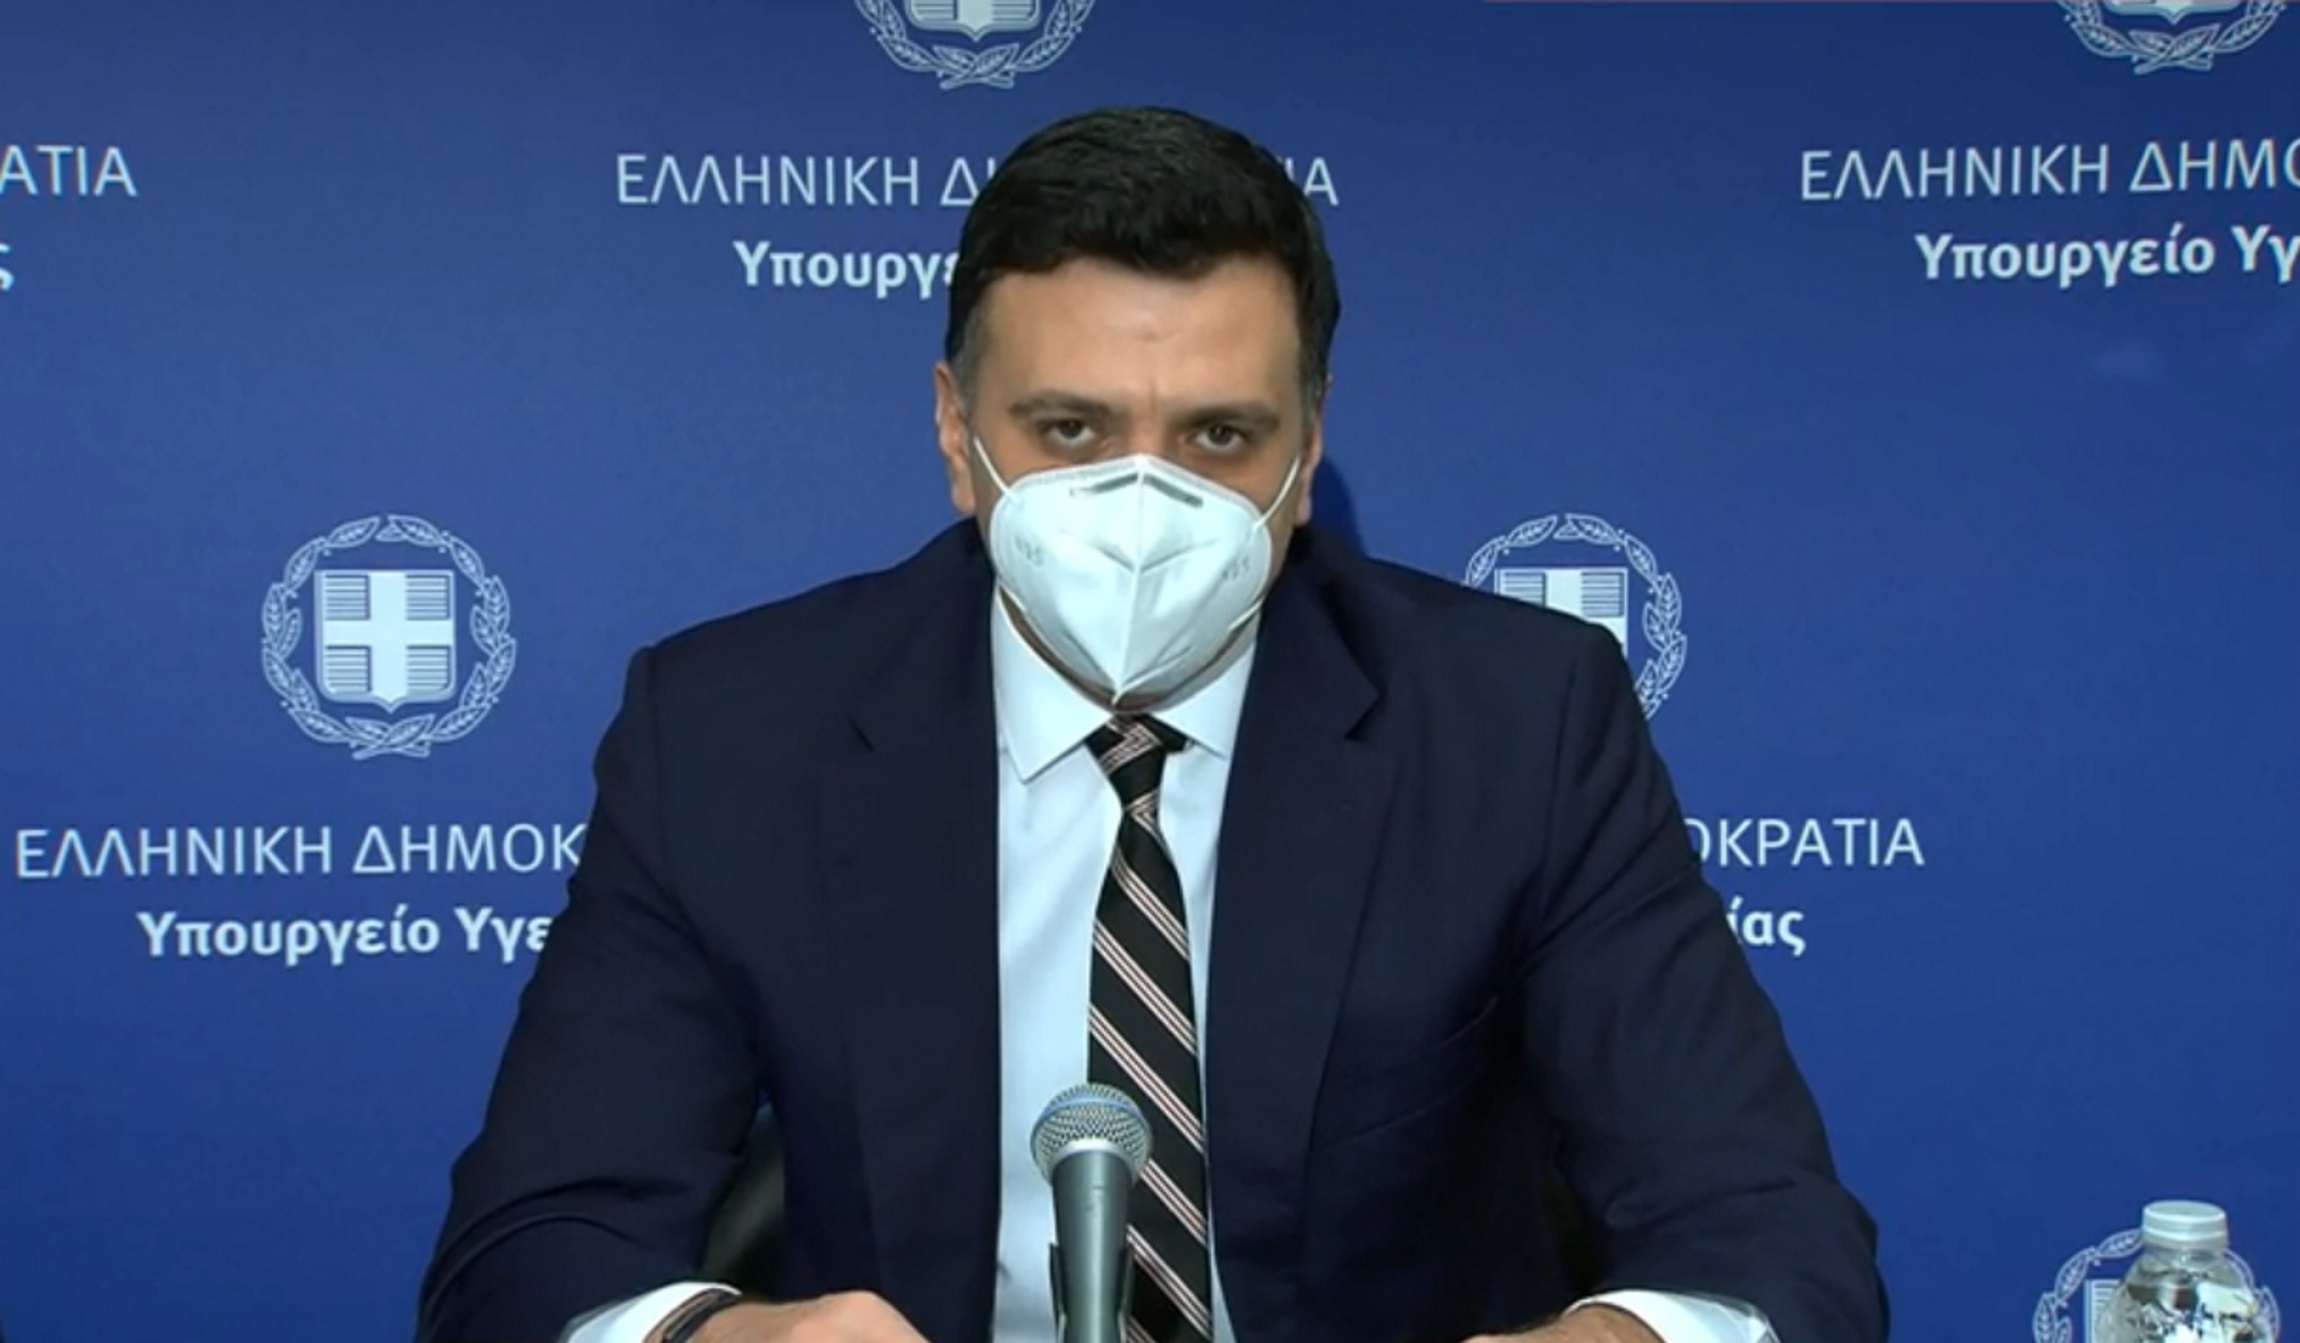 Kikilias: Pandemic management and NSS strengthening important for Greece